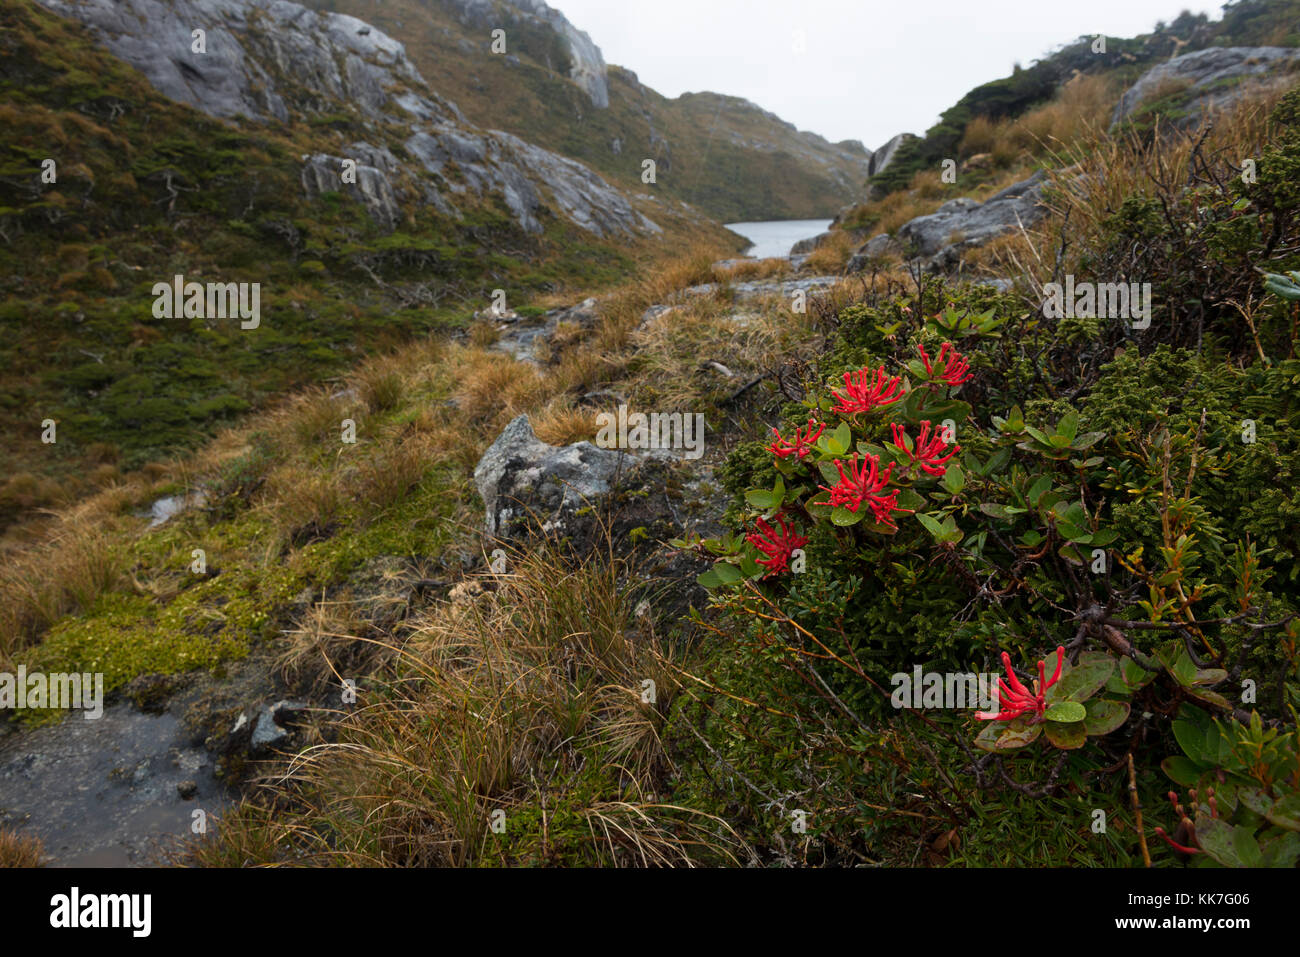 Flower bloom in a remote island in Southern Chile fjords Stock Photo